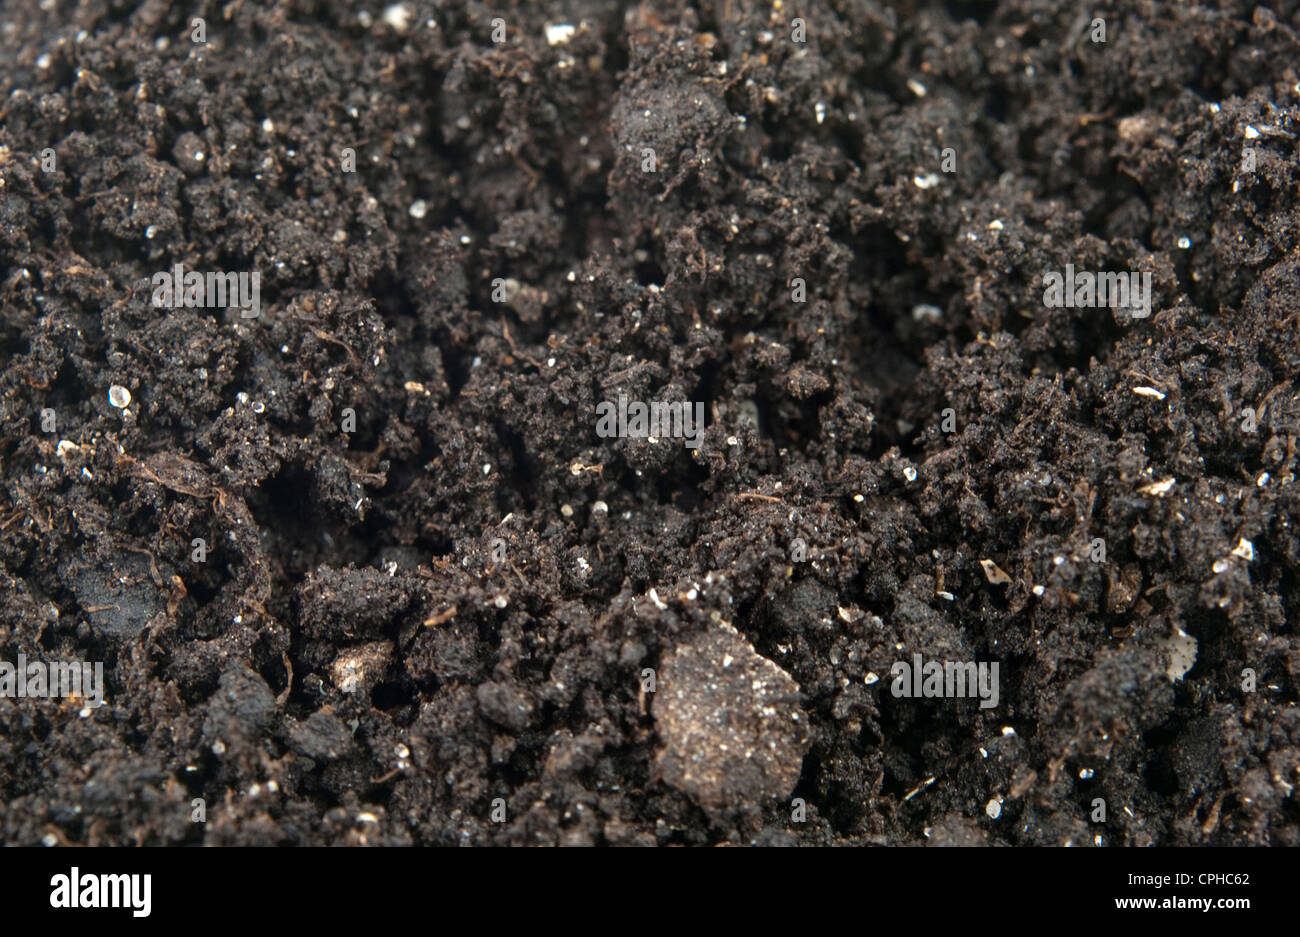 close up of soil and compost mix Stock Photo